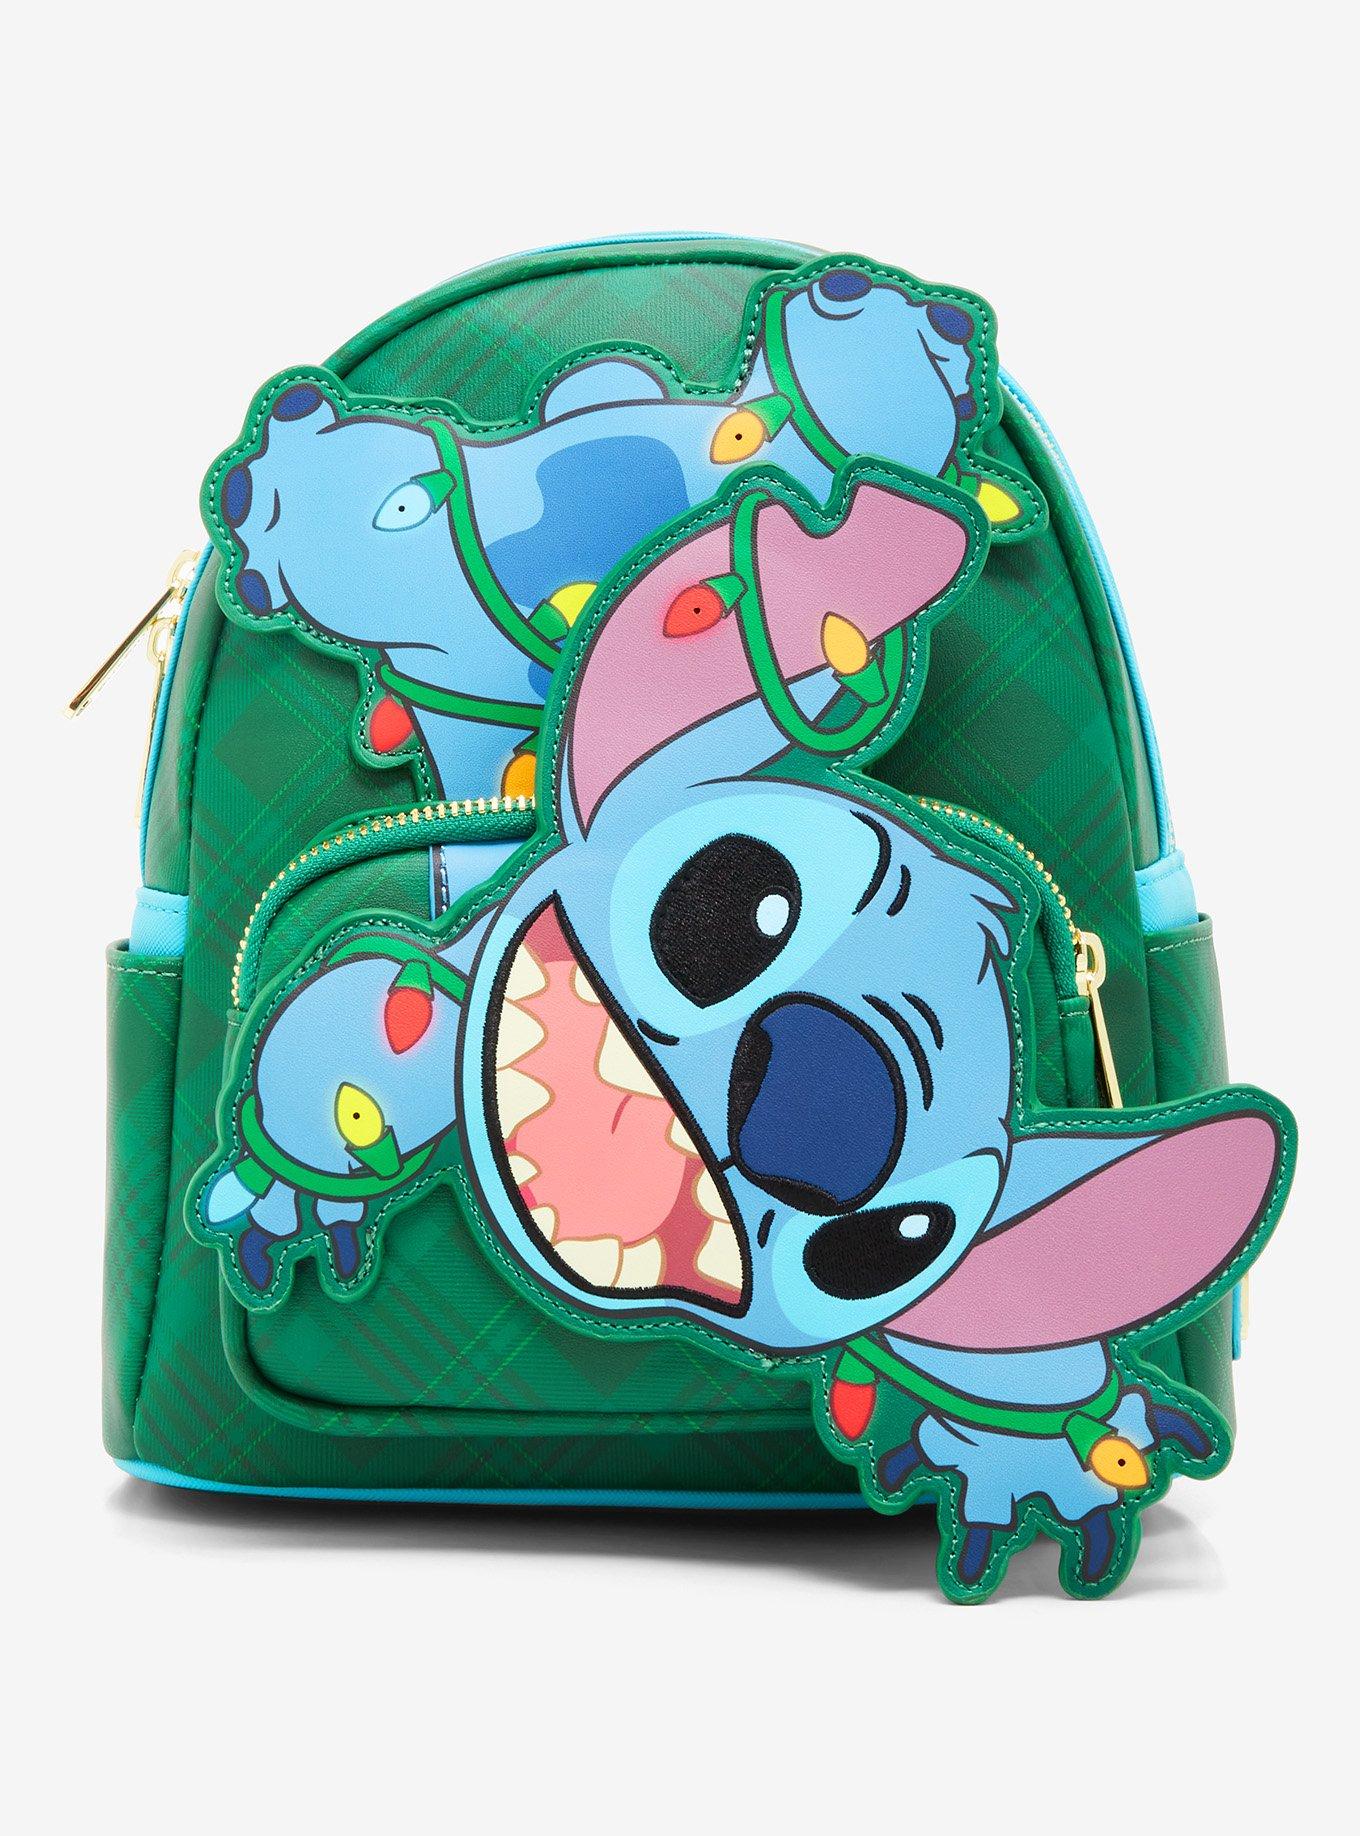 Disney Parks Lilo & Stitch Lunch Bag Lunch Box Backpack